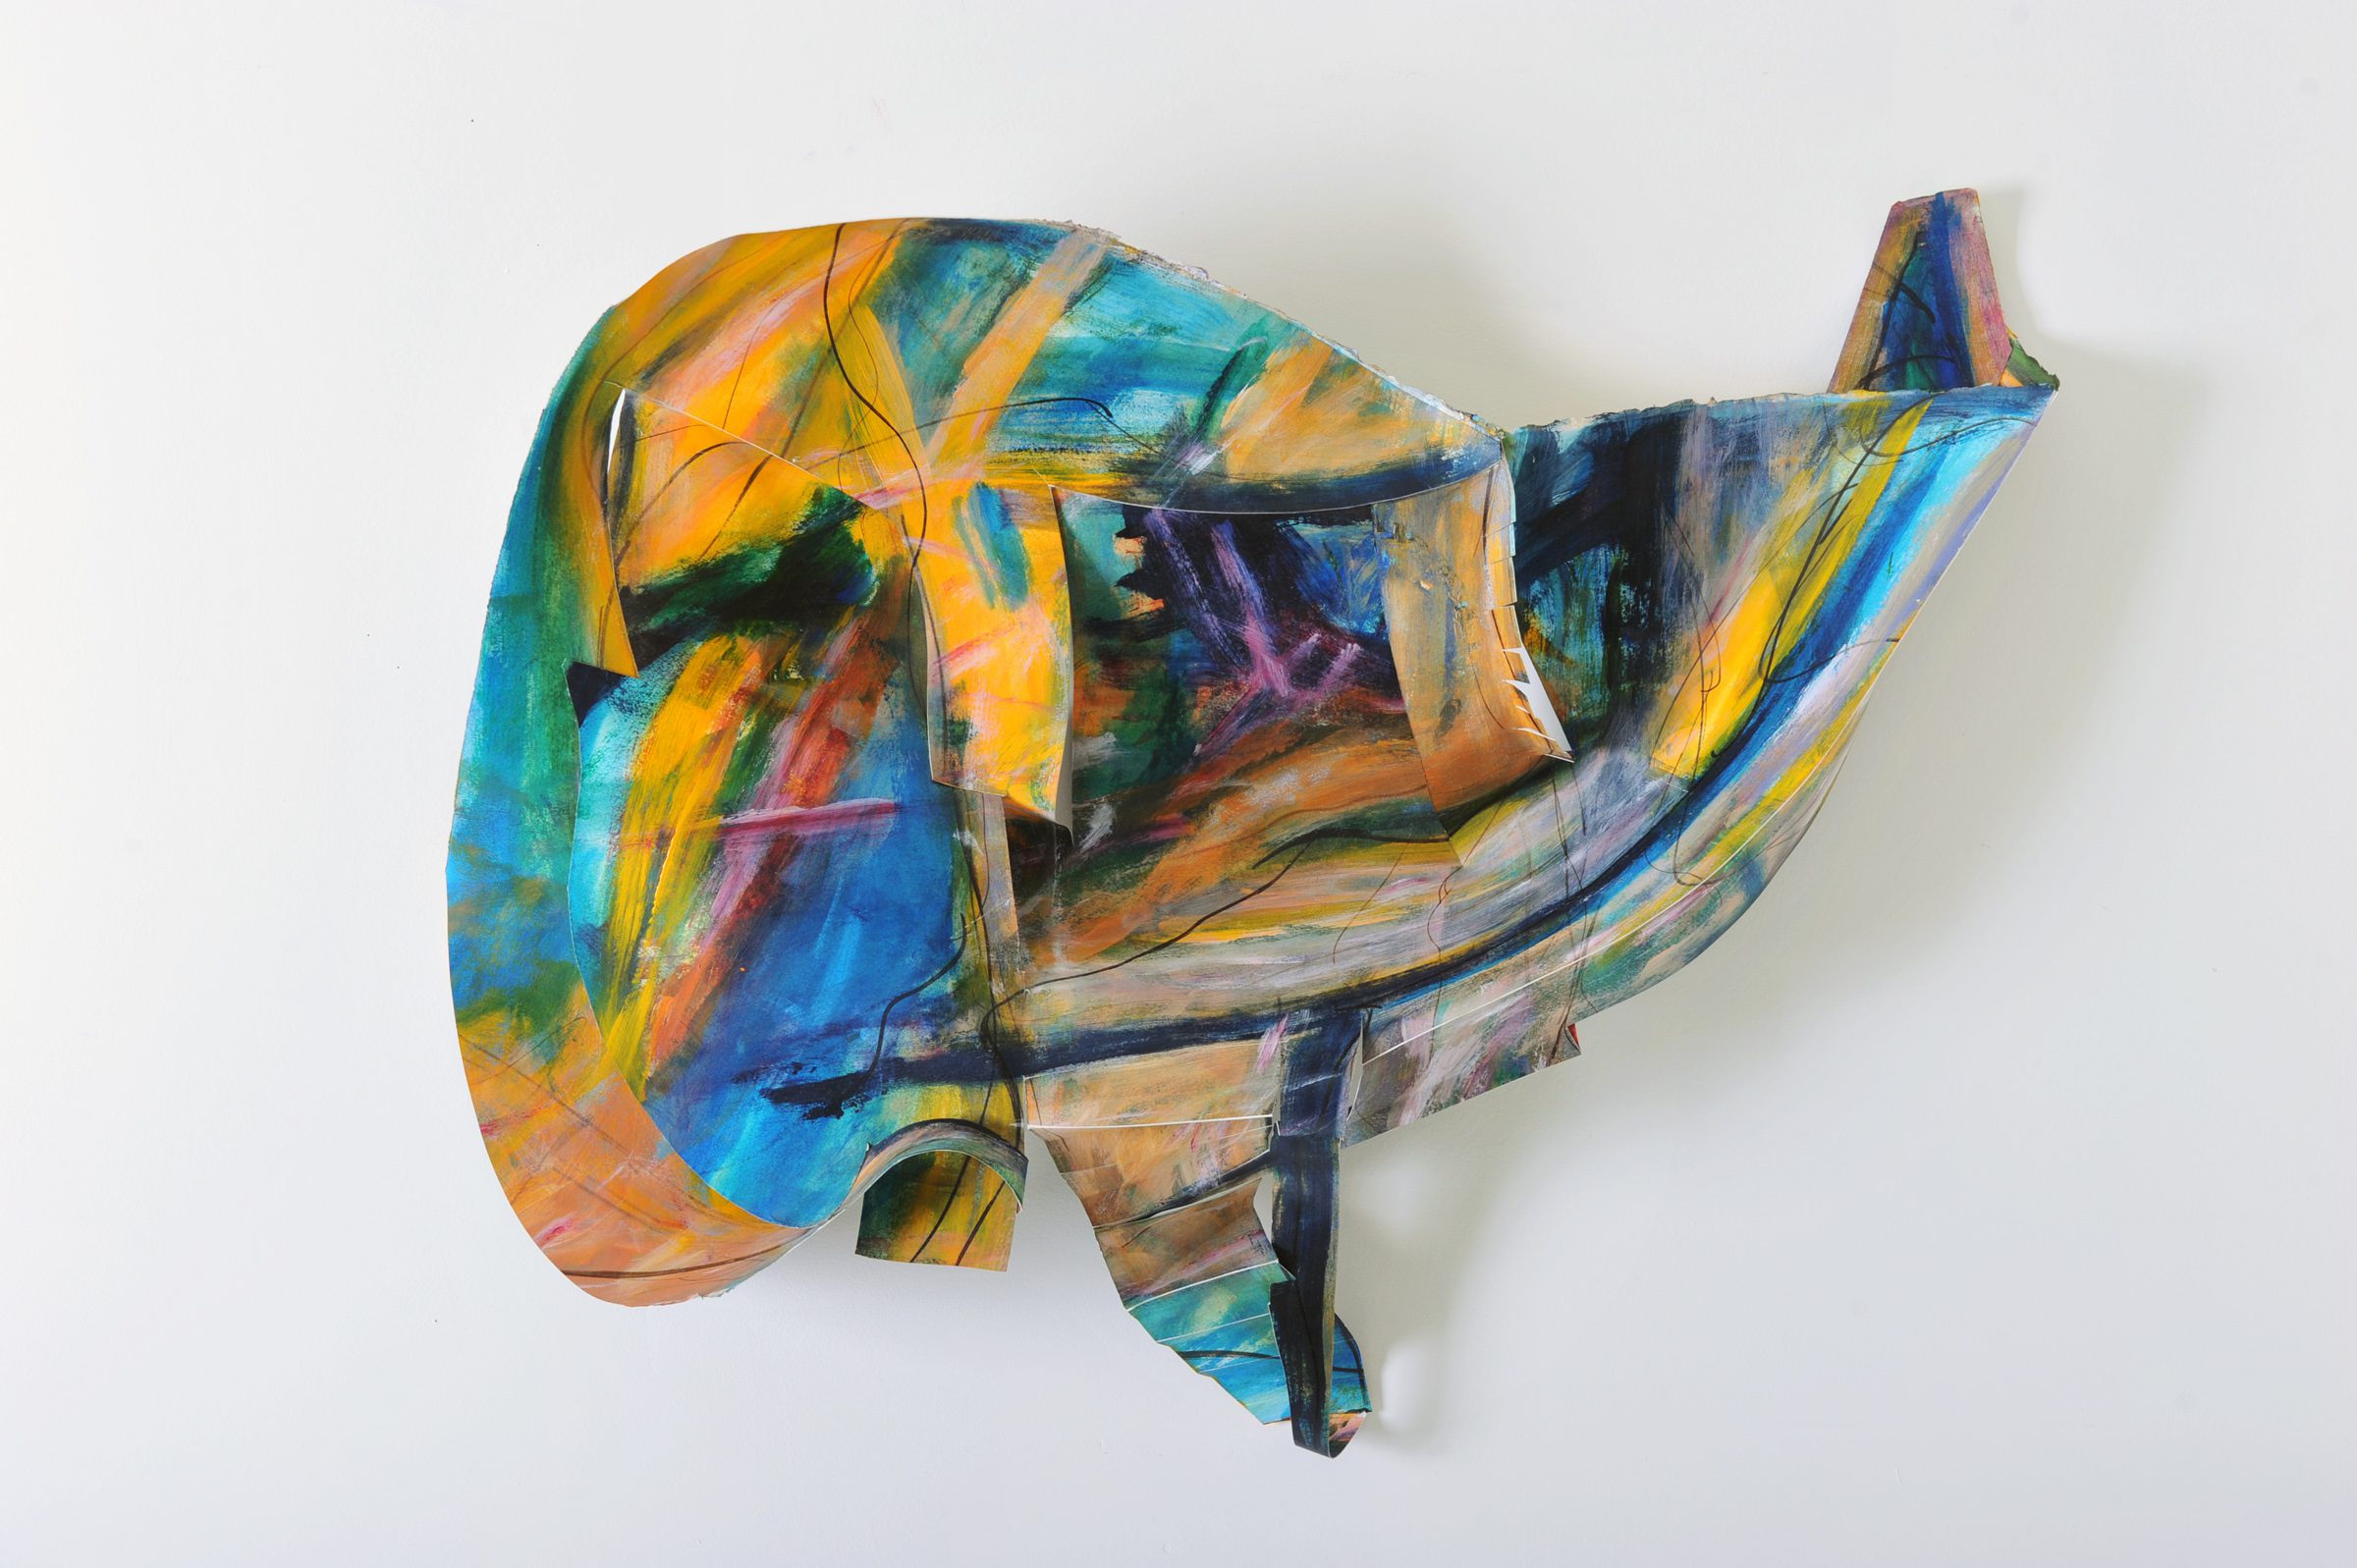 Susan Malmgren is the featured artist at The C Gallery